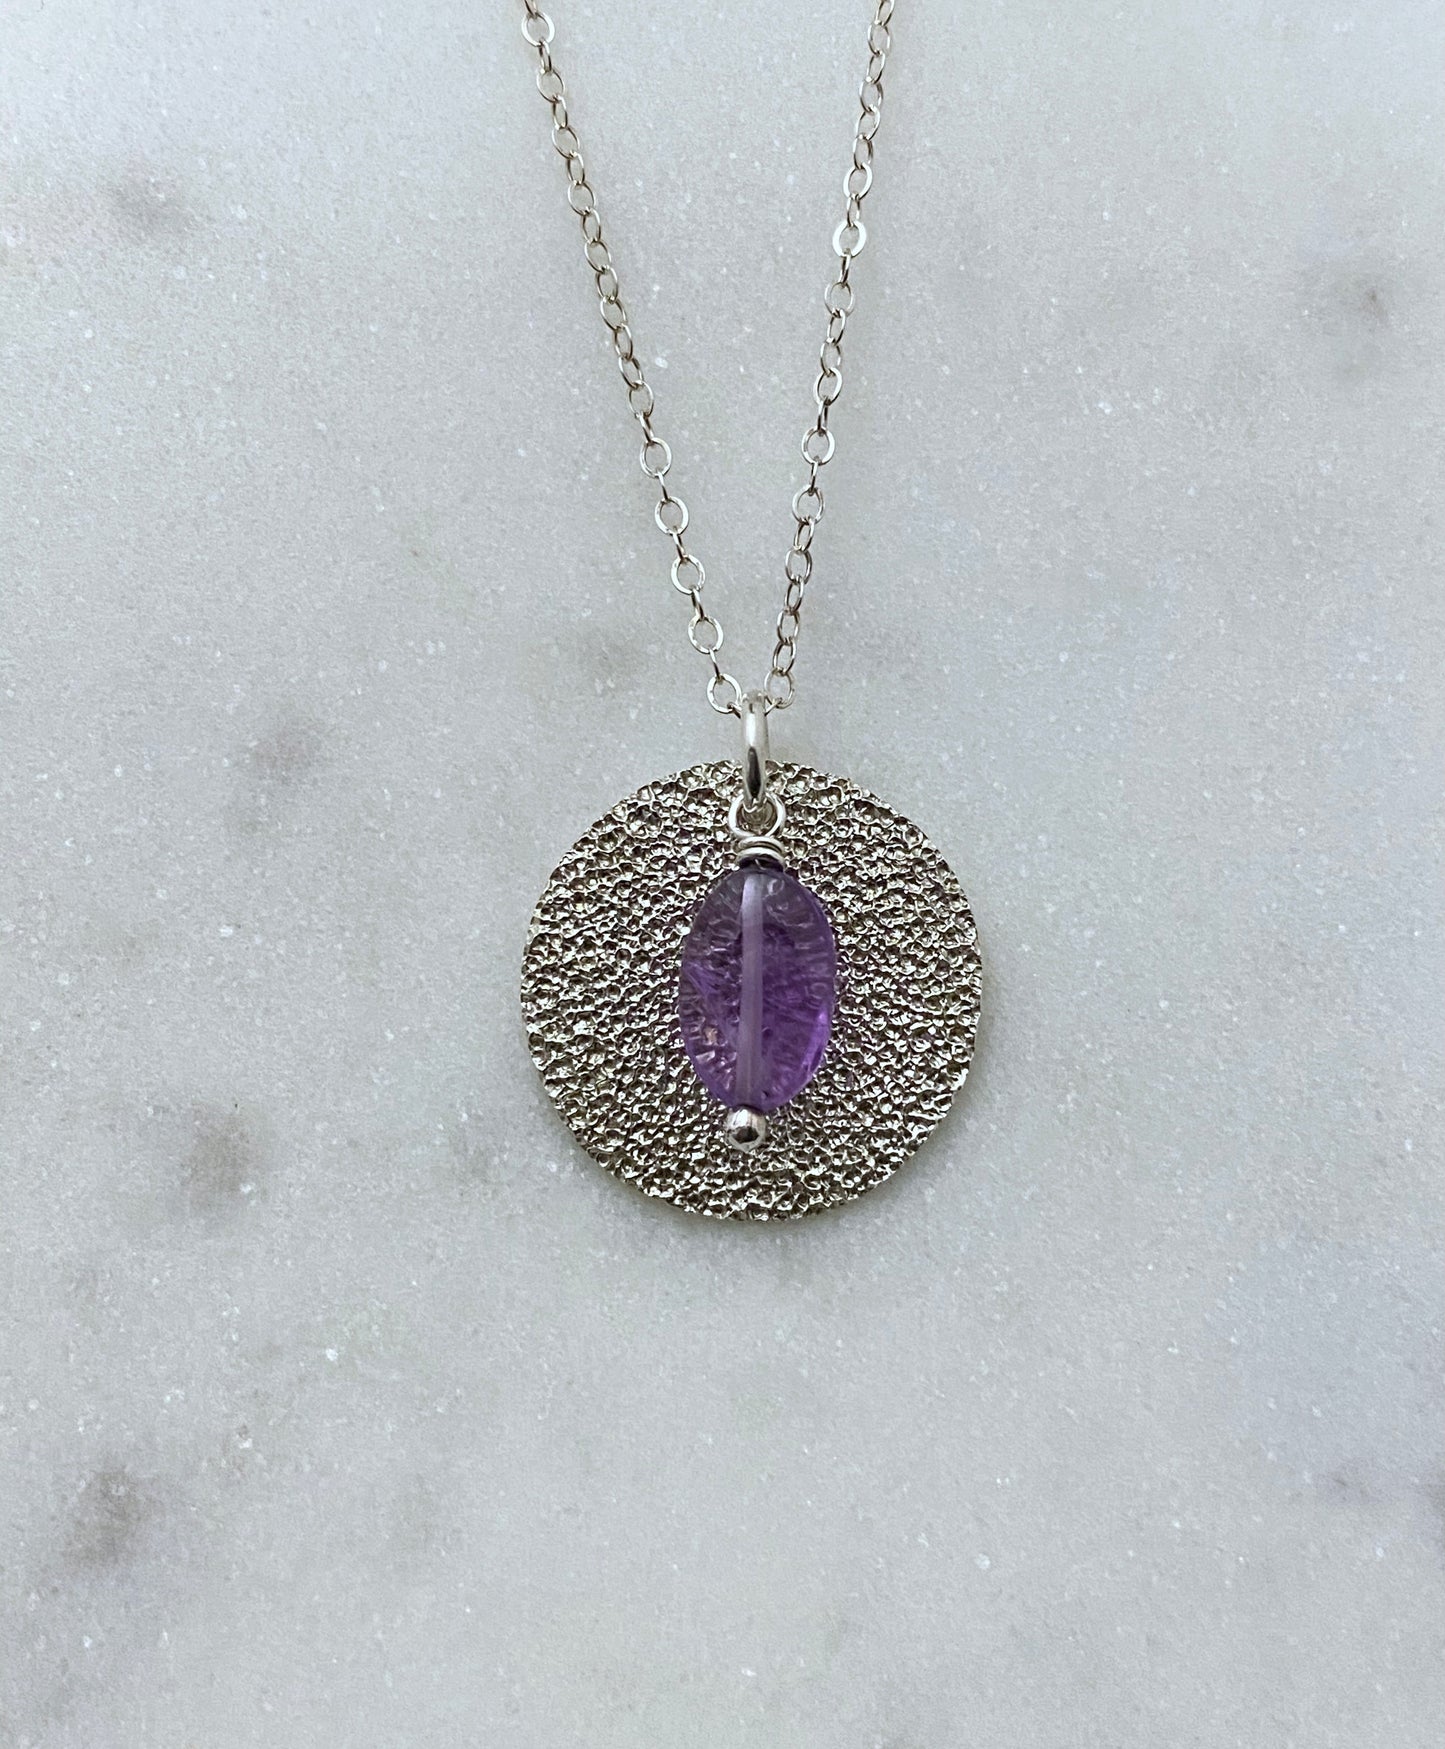 Sterling silver hammer textured necklace with amethyst gemstone